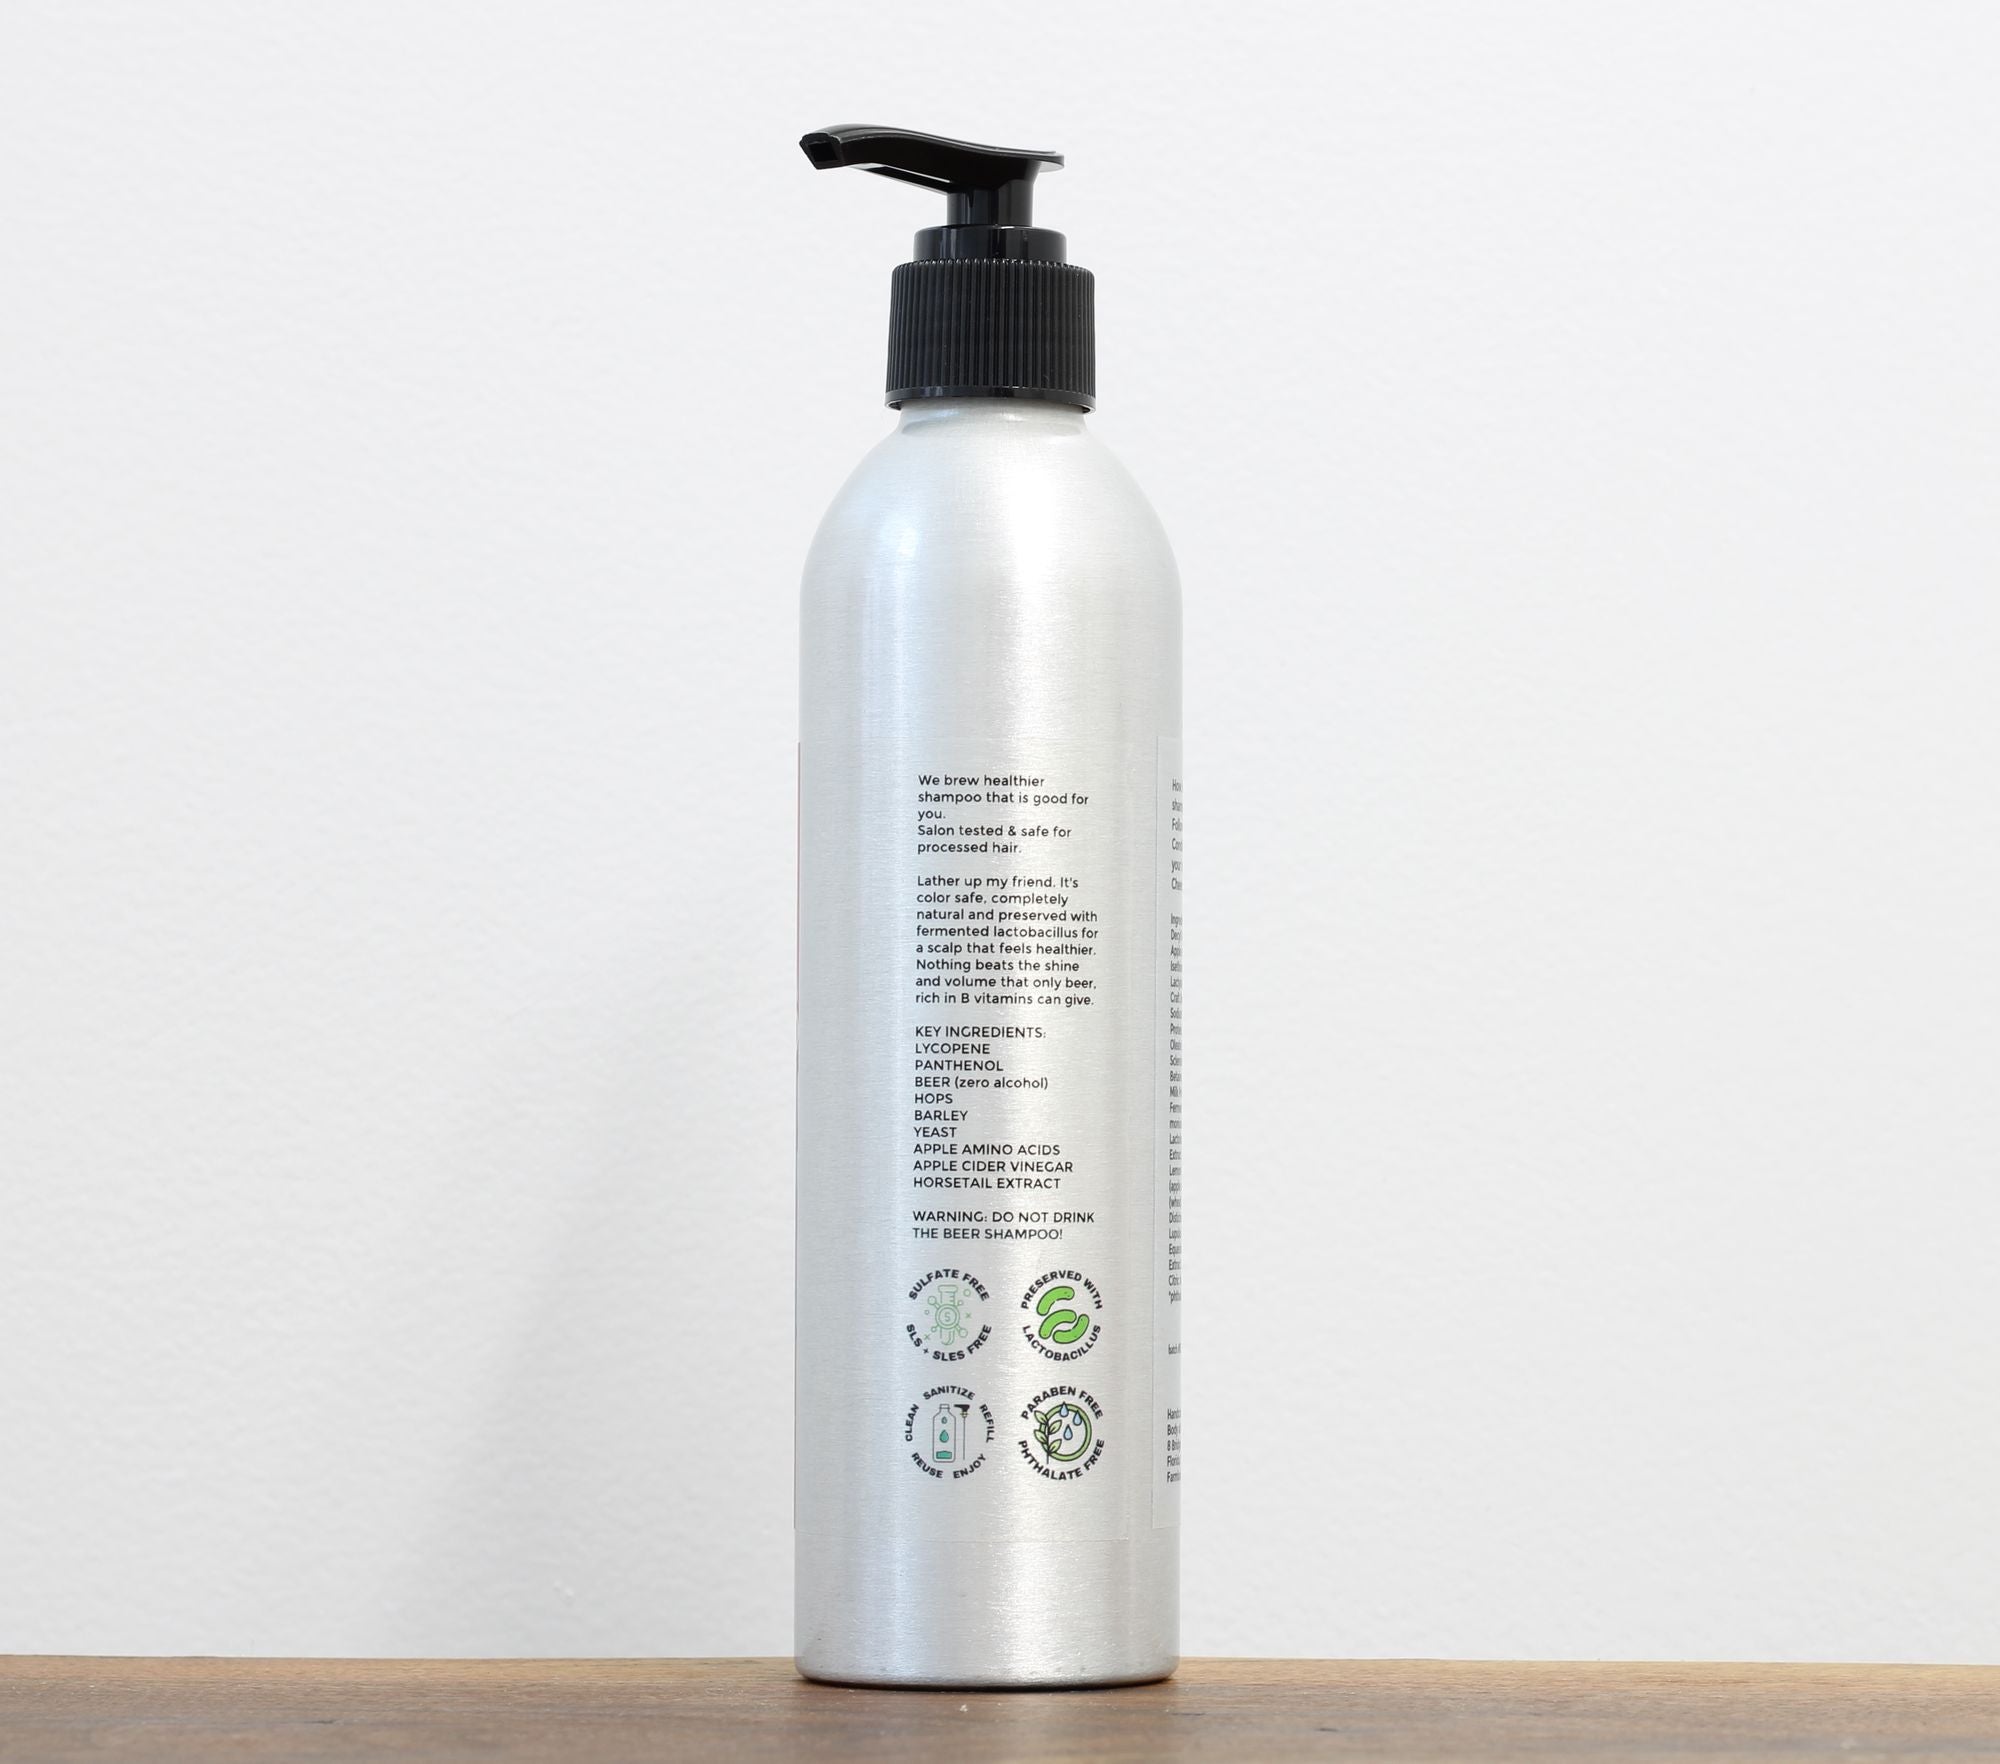 Farmbody Beer Garden Shampoo Key ingredients sulfate free phthalate free paraben free silicone free dimethicone free in a refillable sustainable aluminum bottle